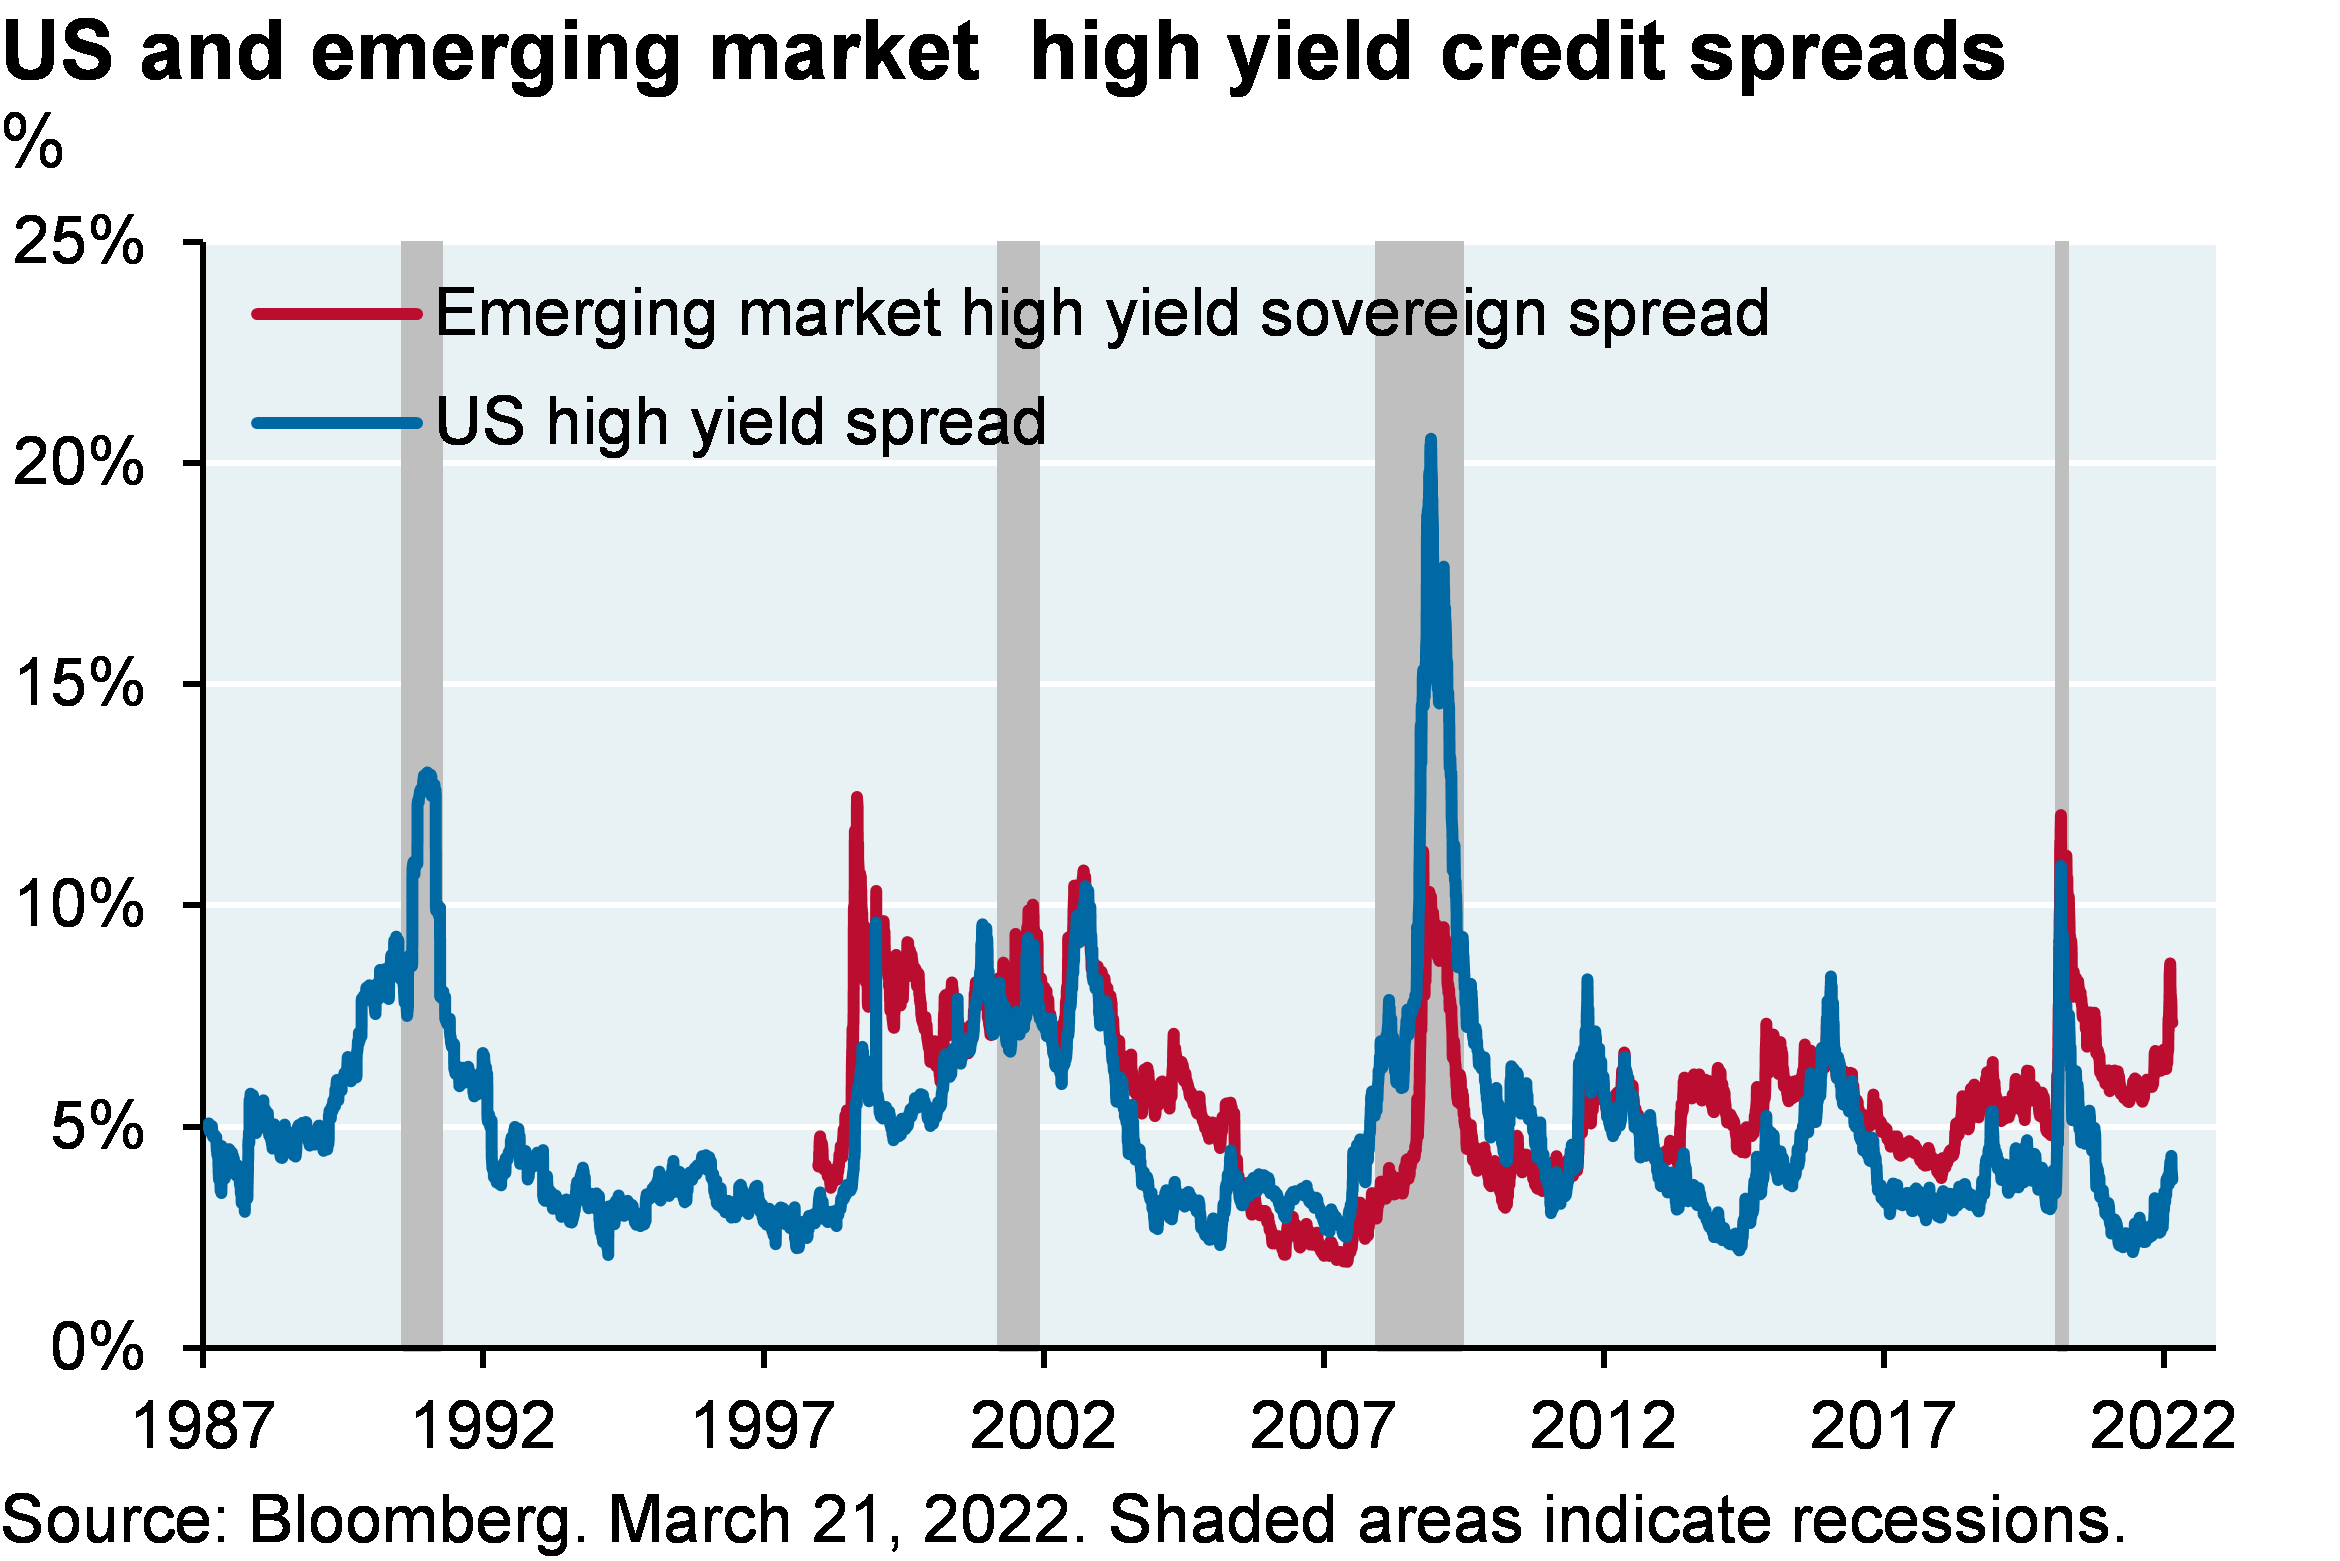 Line chart shows the high yield credit spreads in both the US and emerging market since 1987 and 1997. 